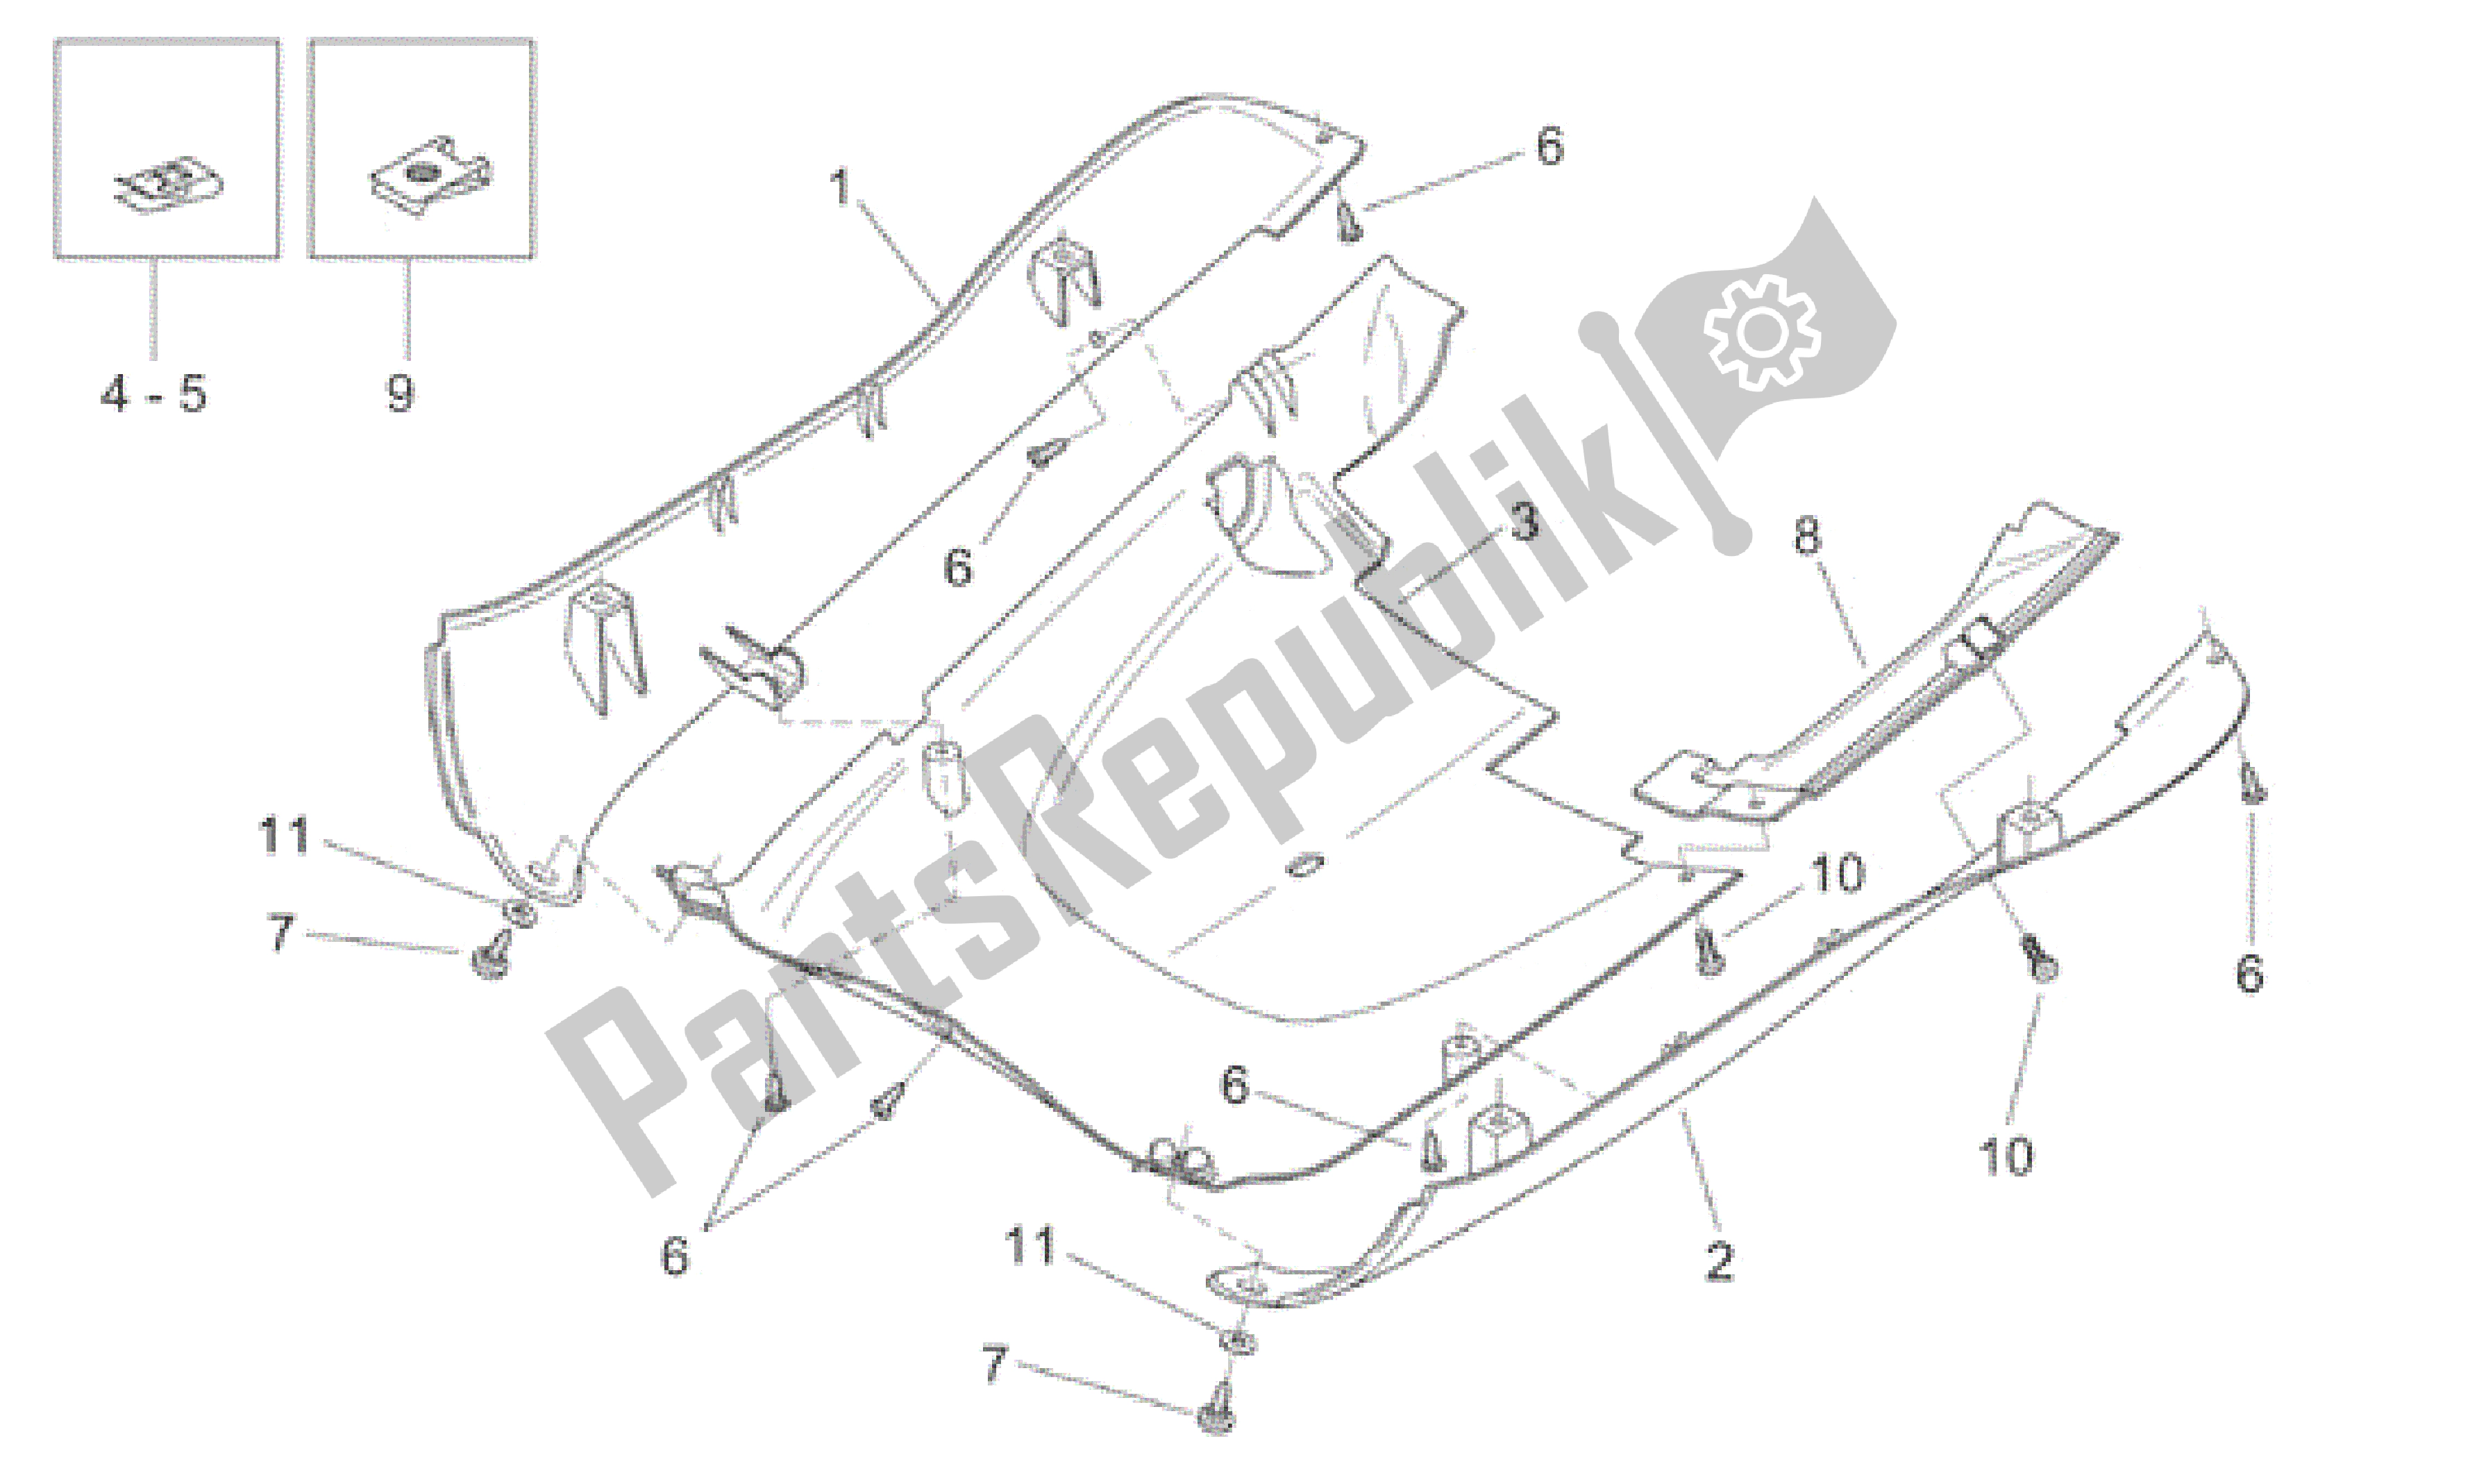 All parts for the Central Body - Underpanel of the Aprilia Habana 125 1999 - 2001